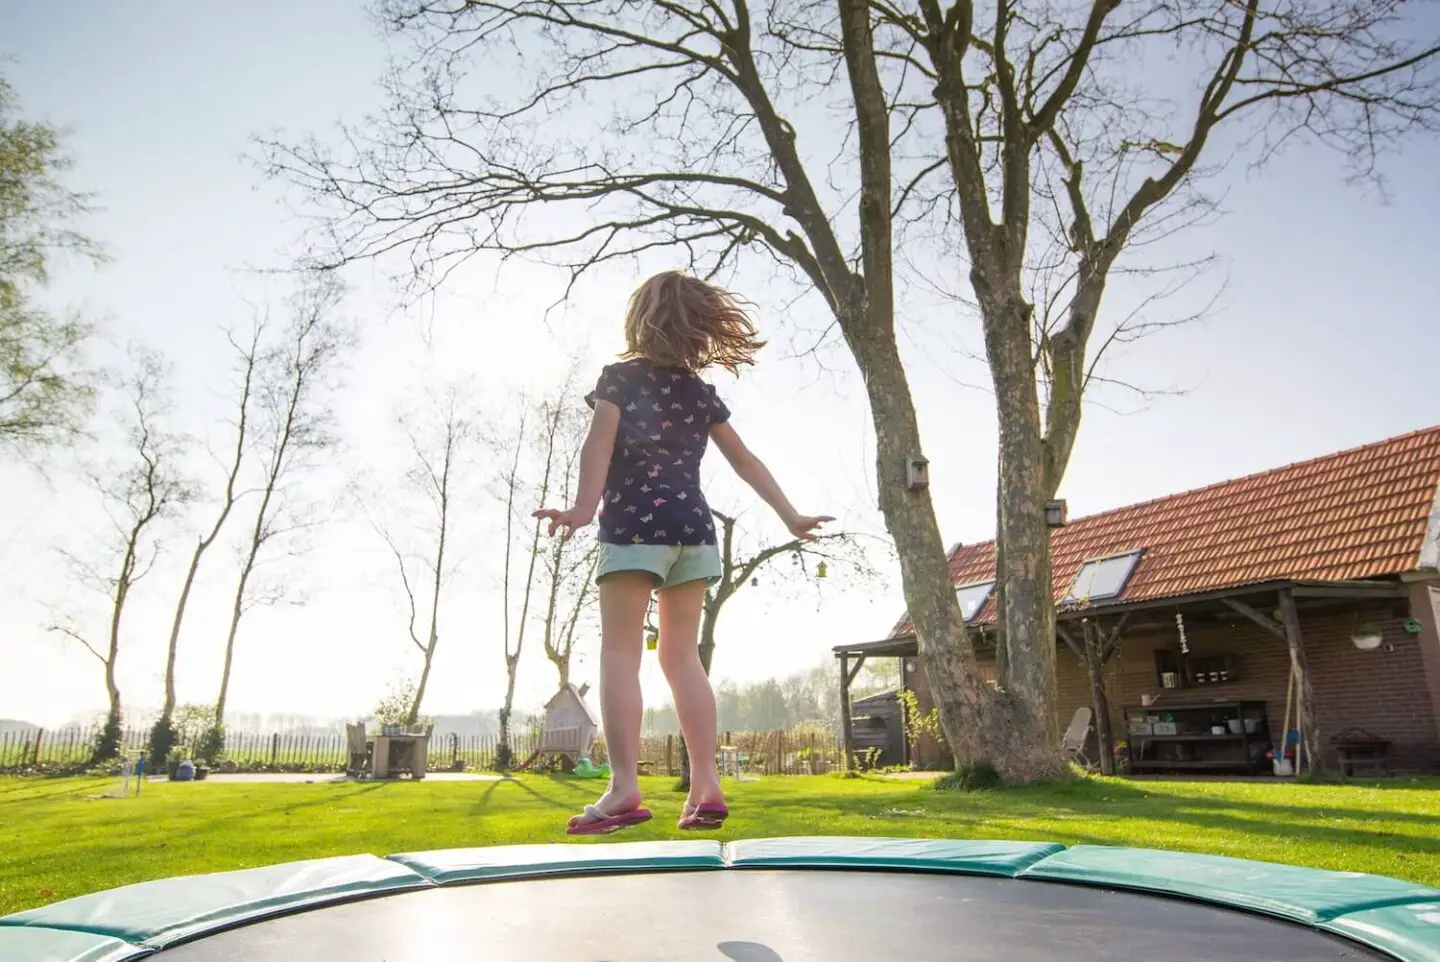 A girl jumping on a trampoline outside